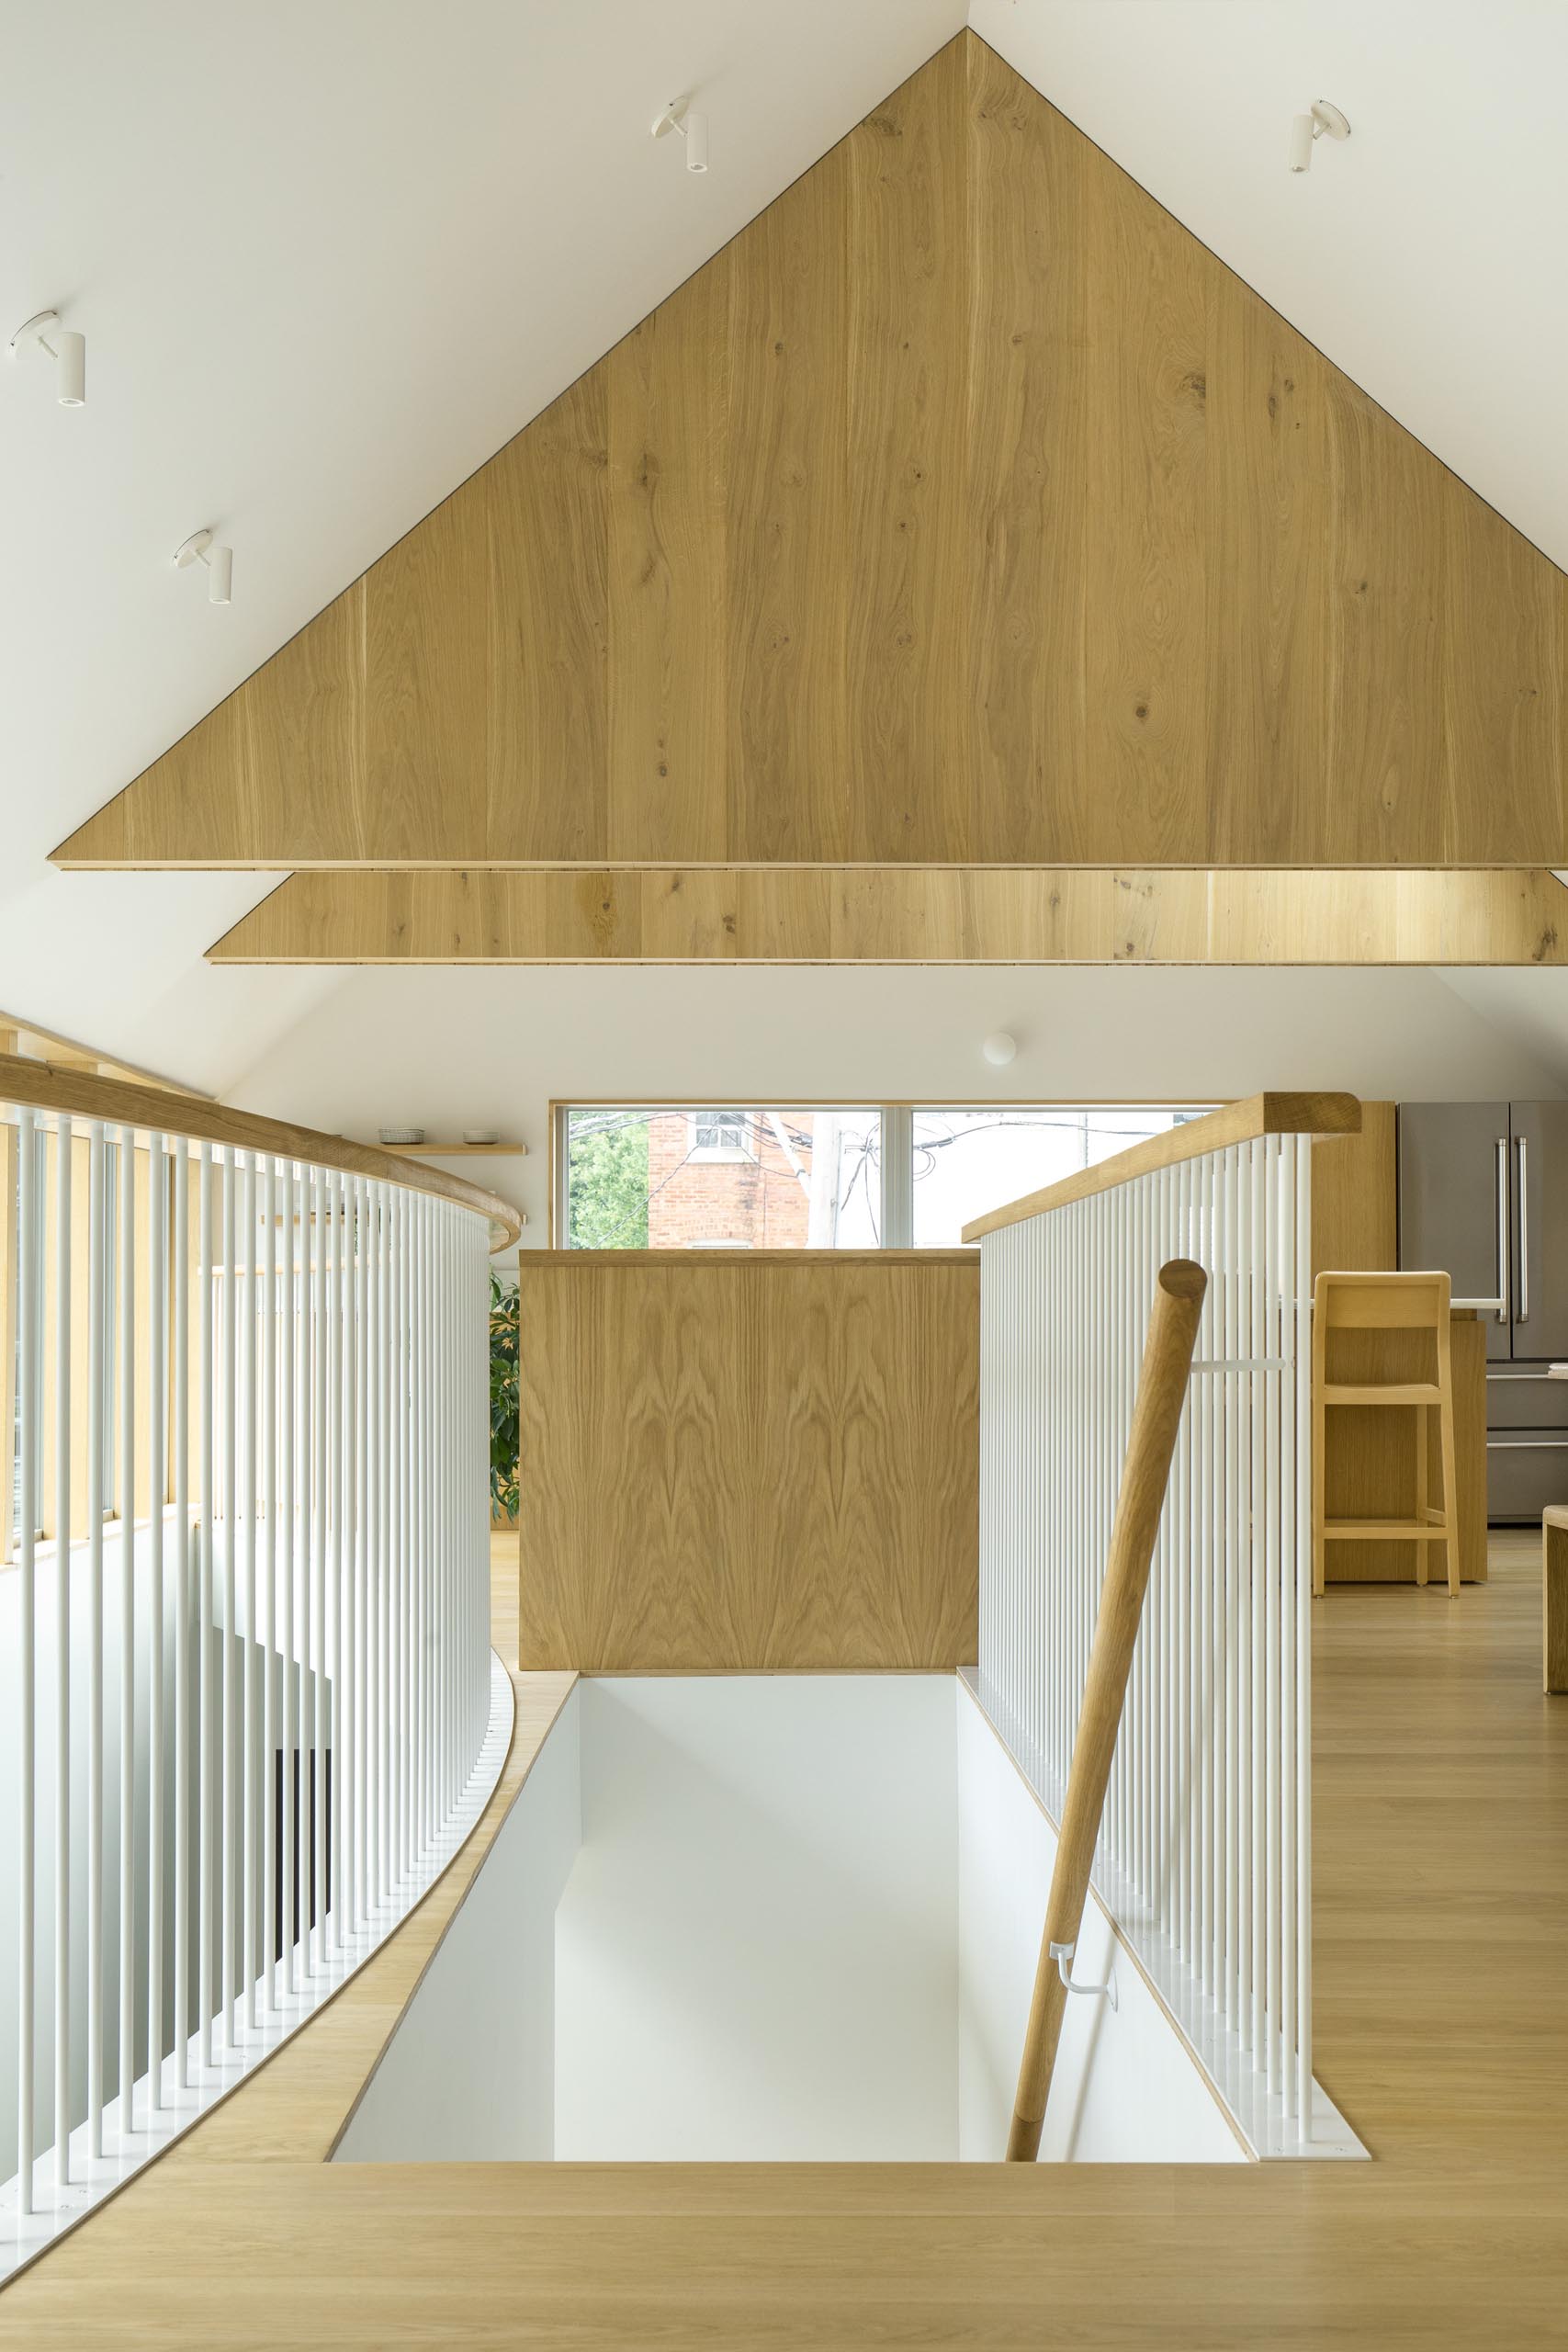 Wood stairs with a matching handrail lead up to the social areas of this modern home.